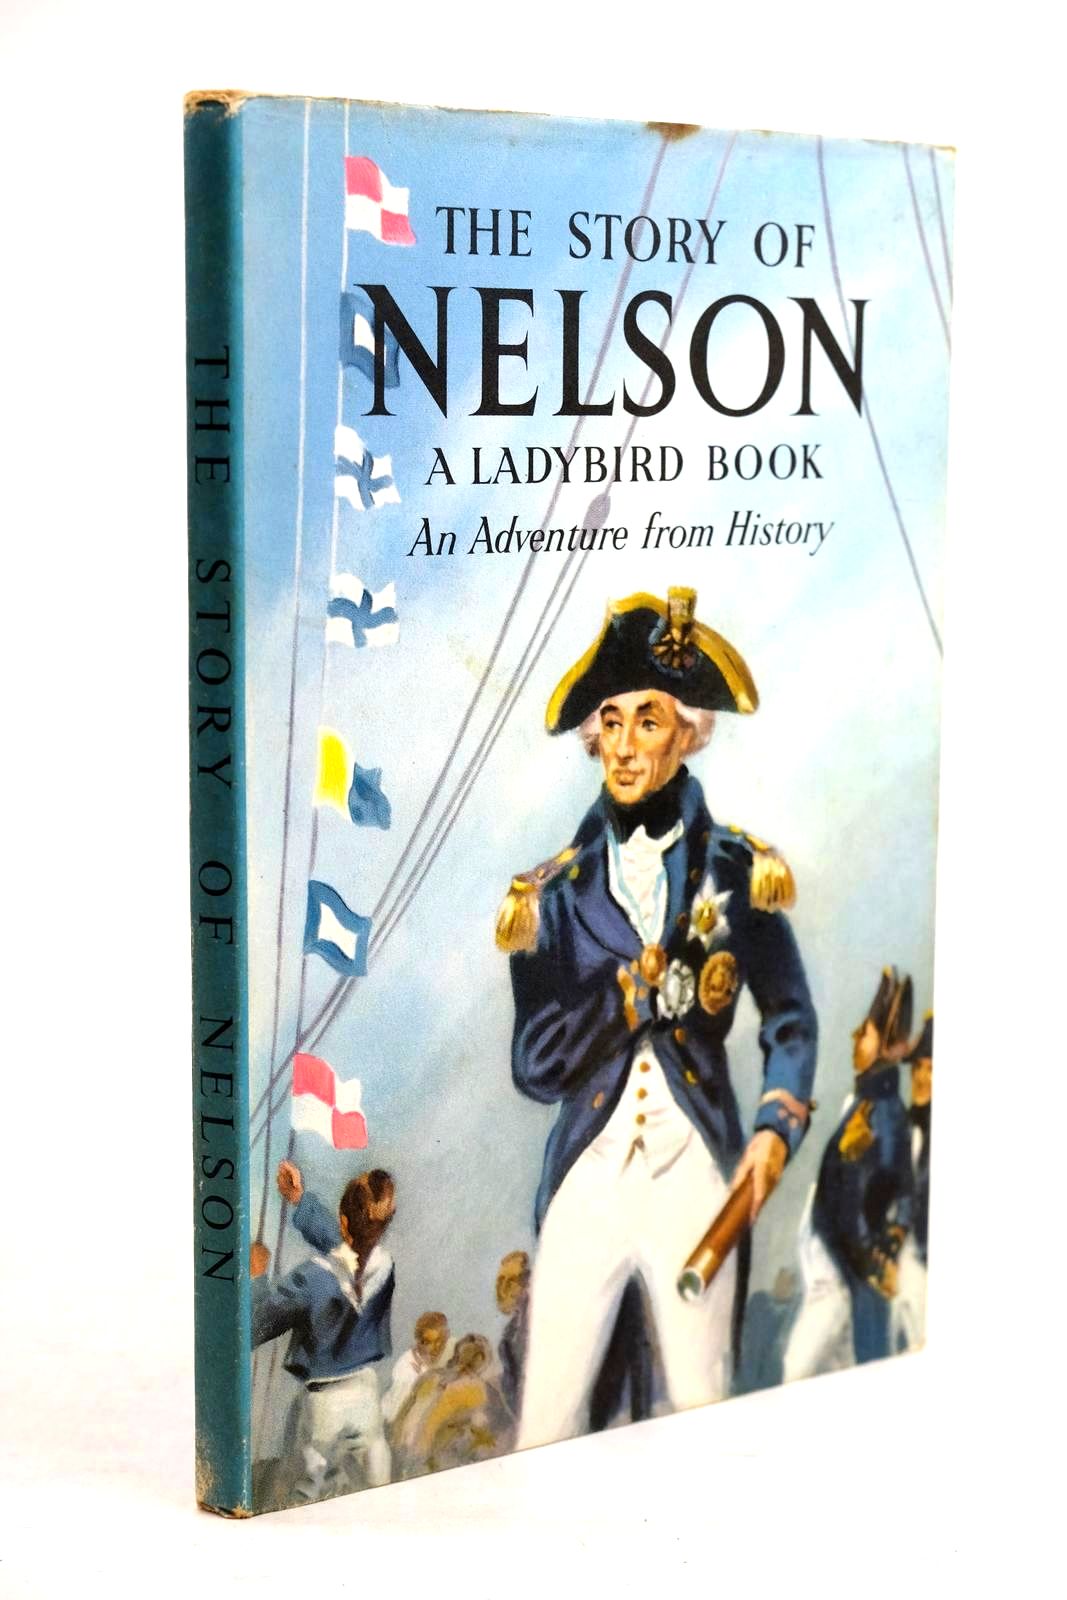 Photo of THE STORY OF NELSON written by Peach, L. Du Garde illustrated by Kenney, John published by Wills & Hepworth Ltd. (STOCK CODE: 1320625)  for sale by Stella & Rose's Books